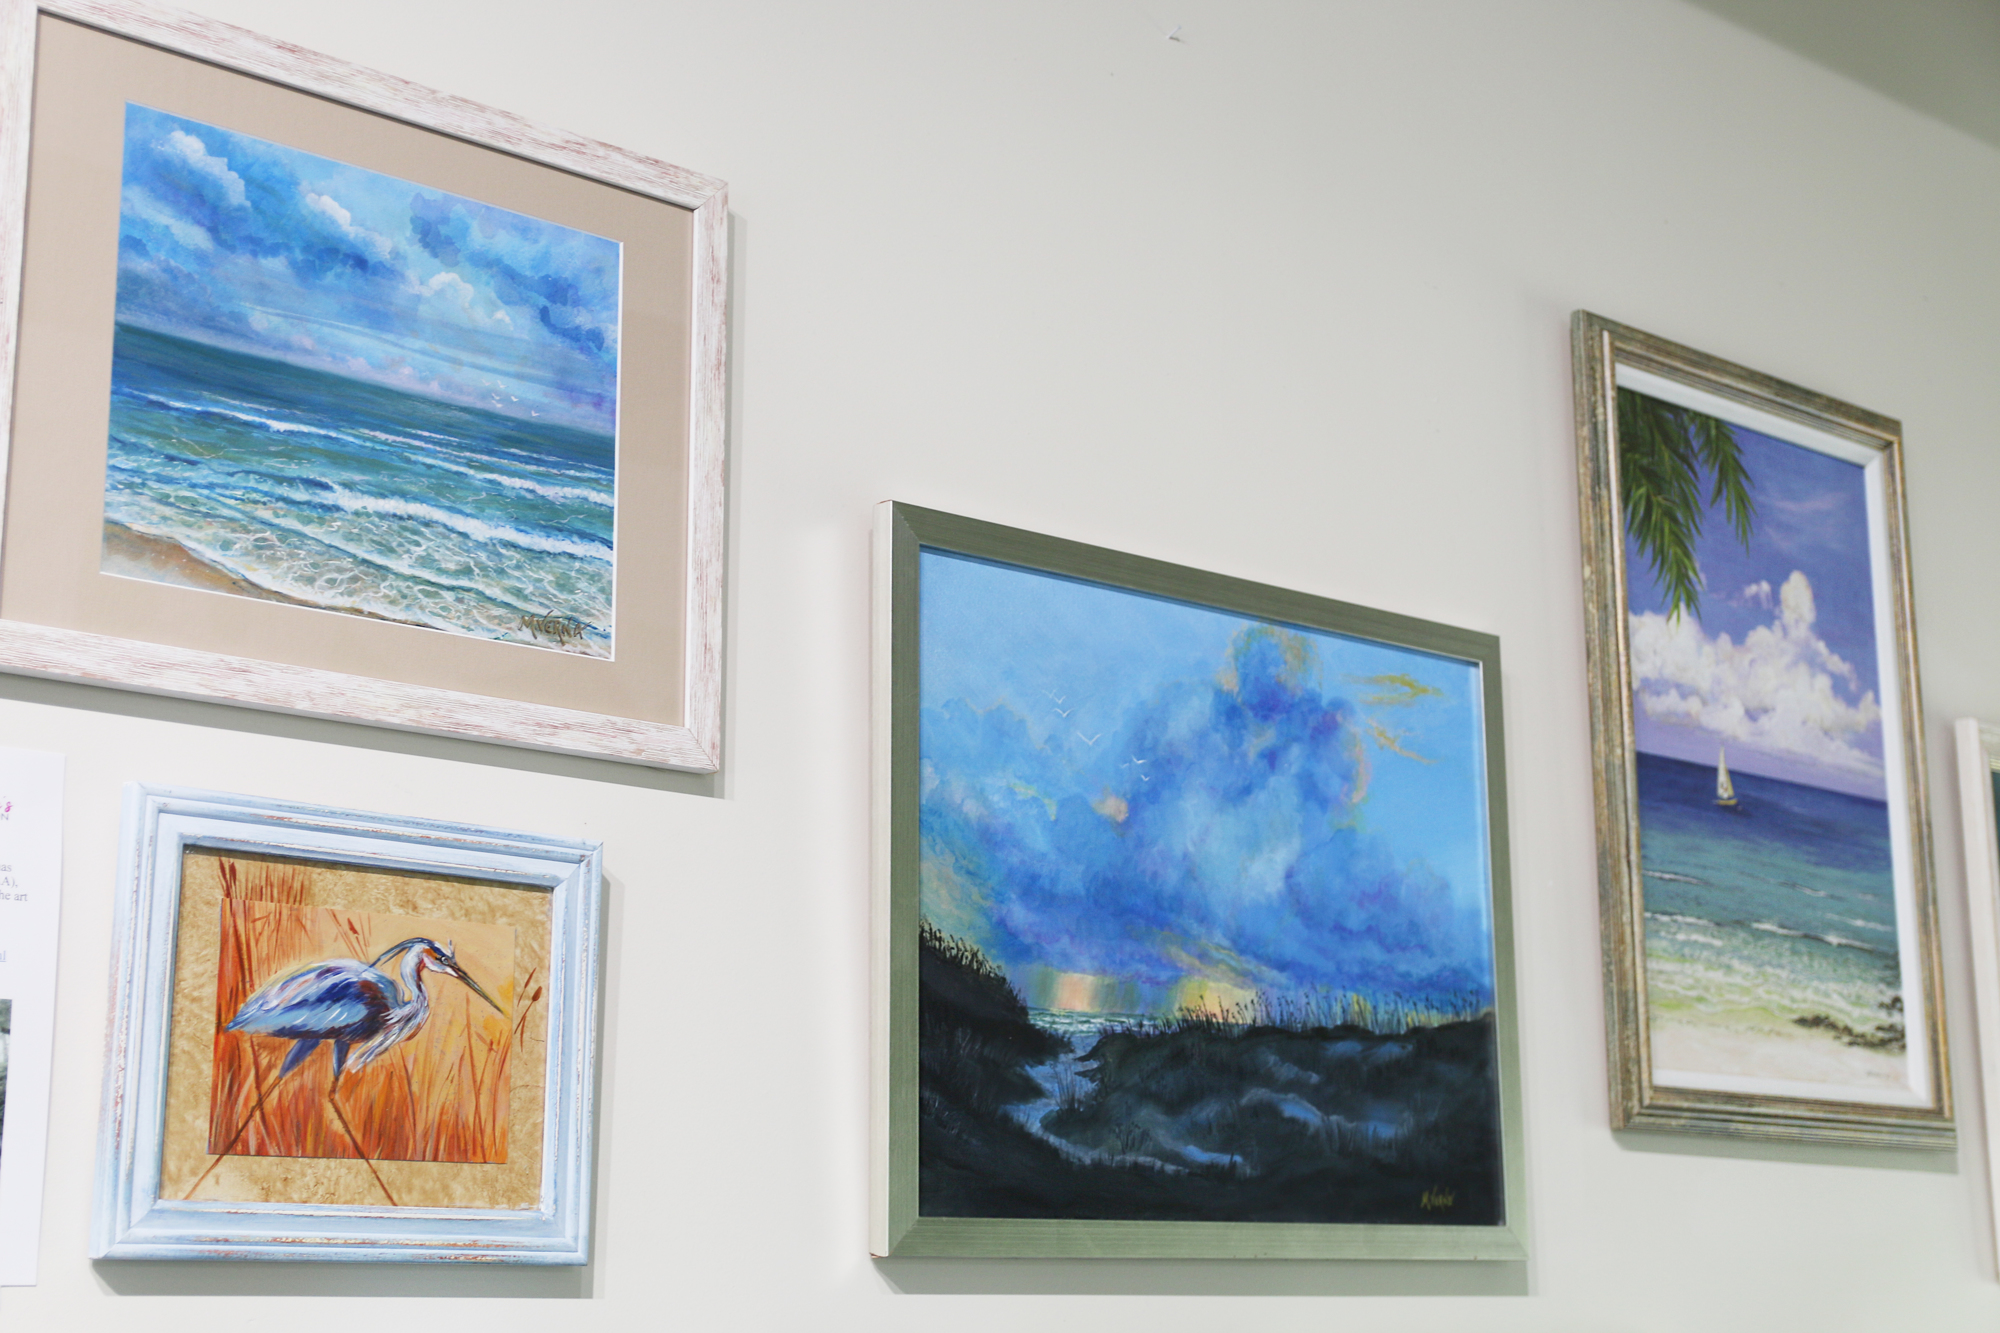 Marianne Verna's pieces portray Florida's beaches, and each seascape has something unique. Photo by Jarleene Almenas